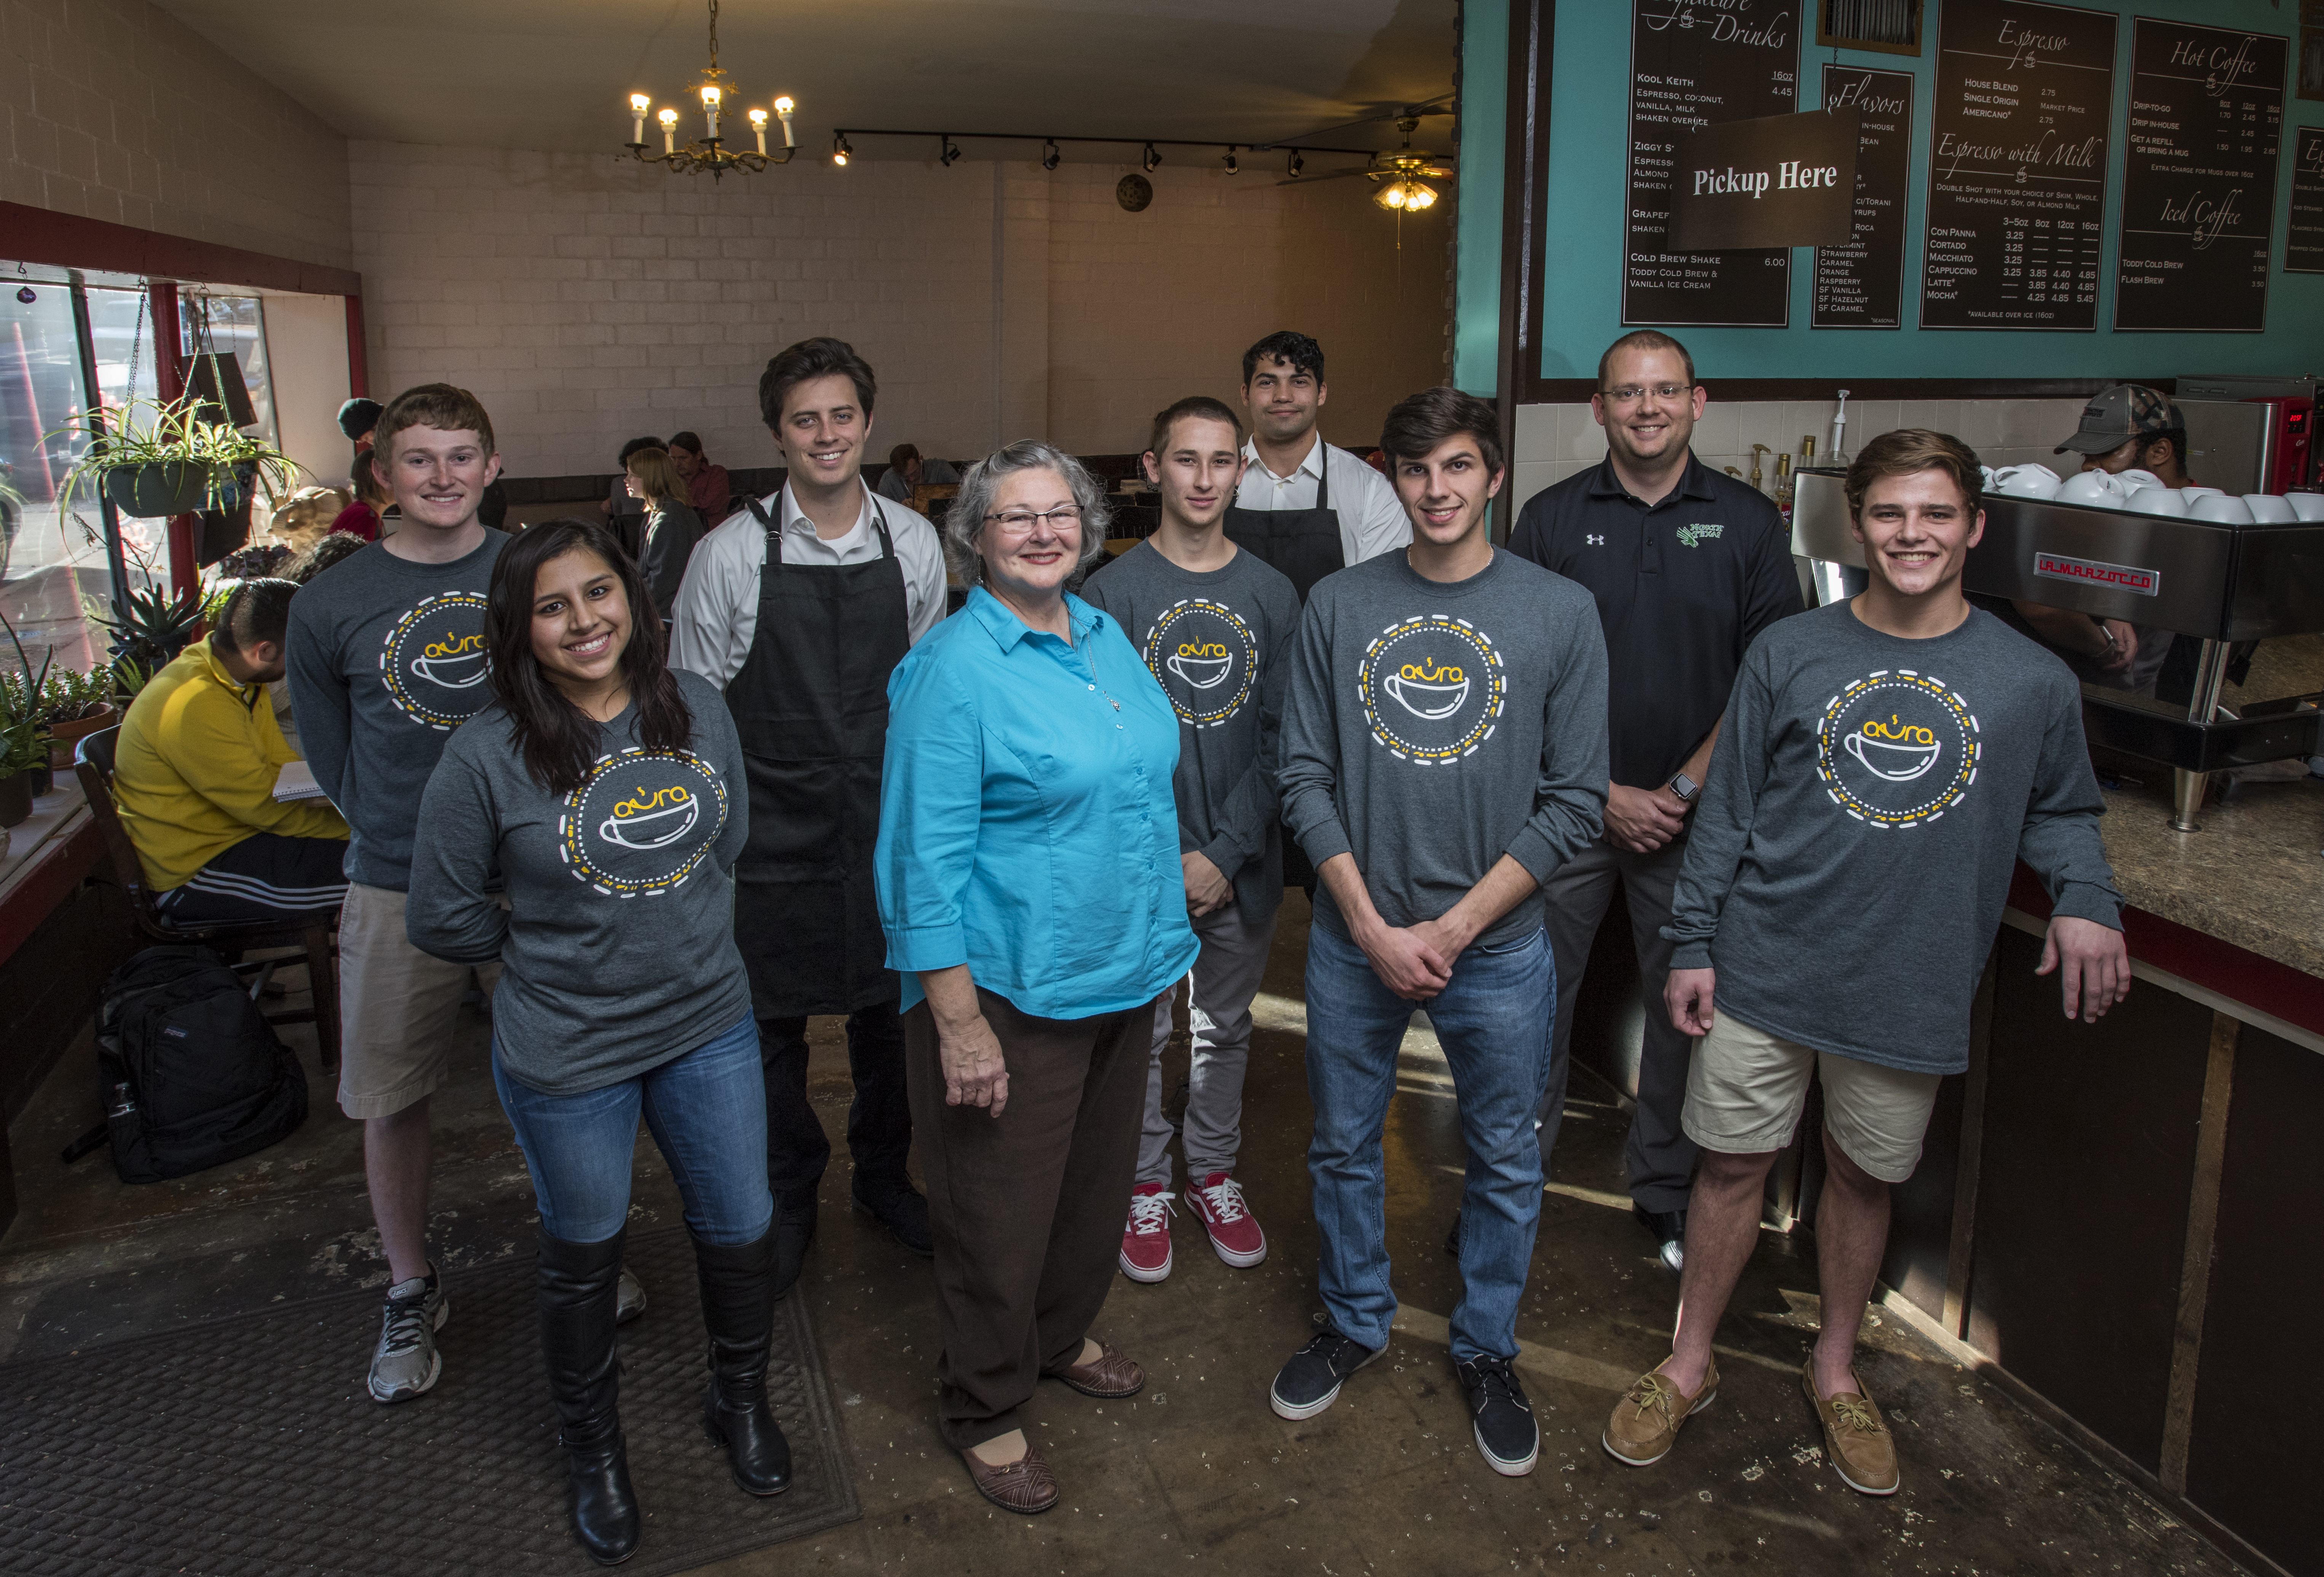 UNT senior marketing students pose inside Aura Coffee with the owner, Kim McKibben, and doctoral teaching fellow Eric Kennedy. Pictured first row: Samantha Saucedo, Kim McKibben, Benjamin Masso and Michael Begley. Pictured second row: John Michael Davis, Sam Snell, Daniel Tate, Alexander Dalaki and Eric Kennedy.